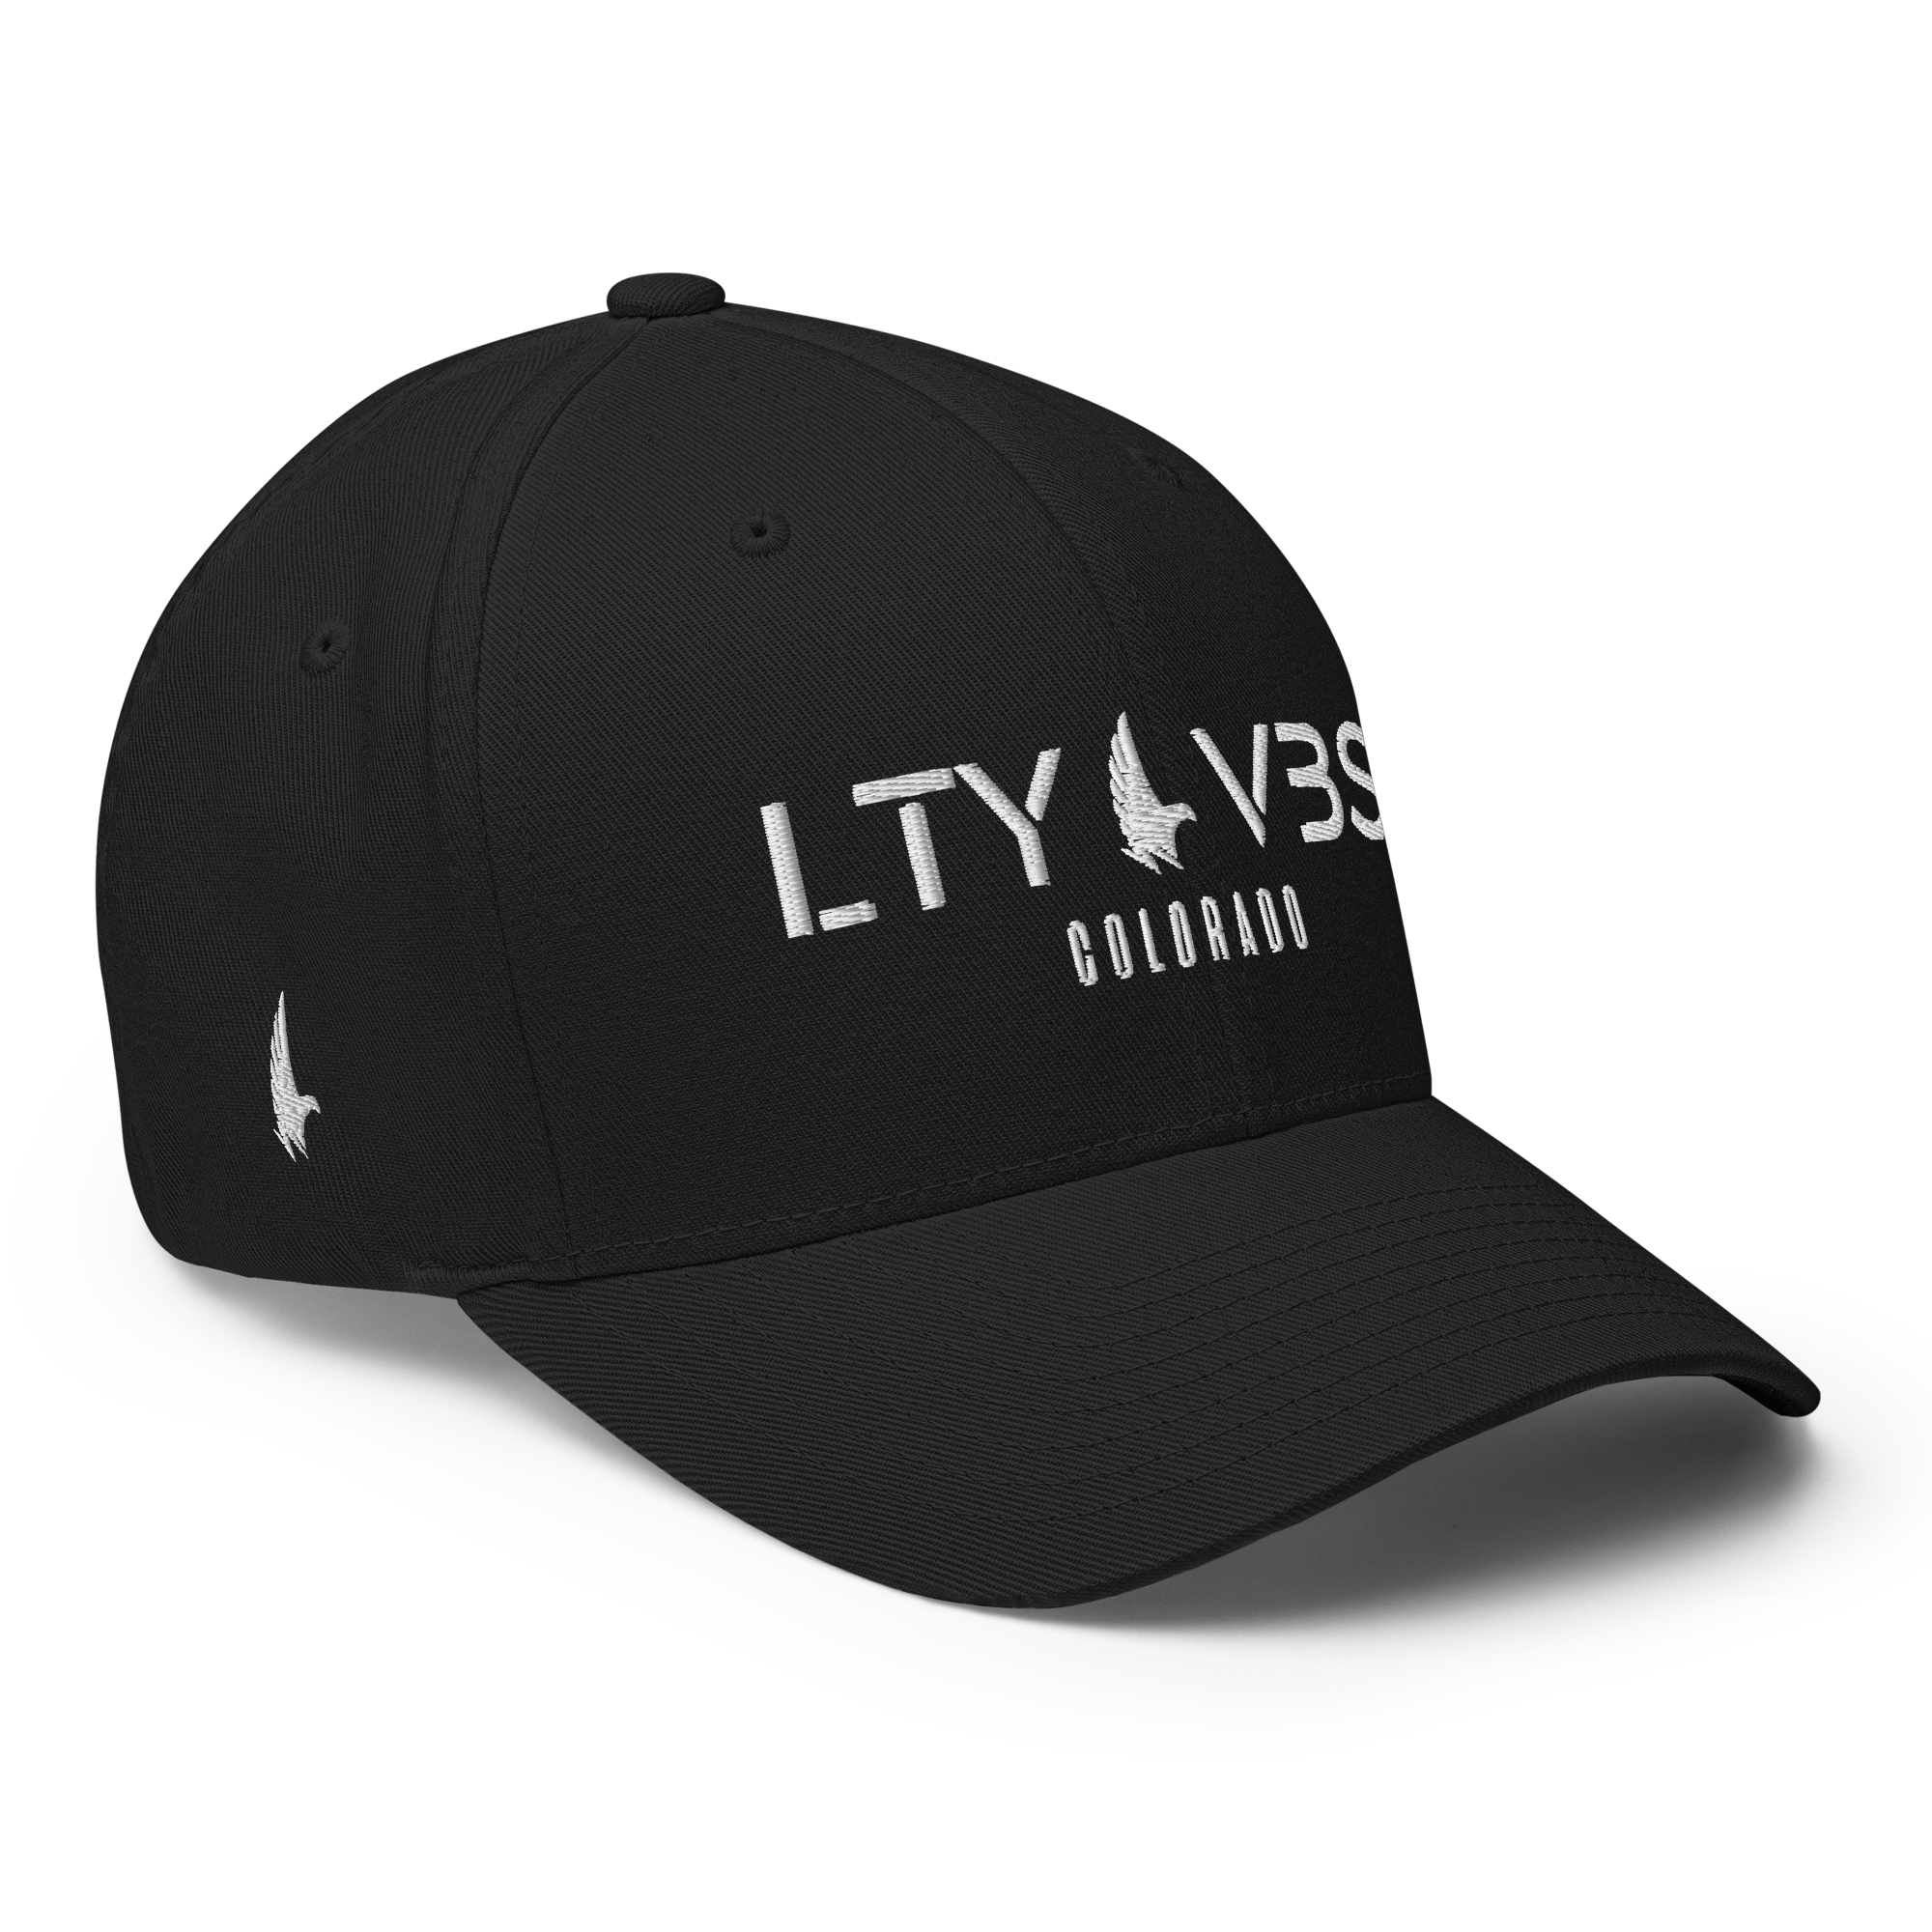 Loyalty Era Colorado Fitted Hat Black / White Fitted - Loyalty Vibes